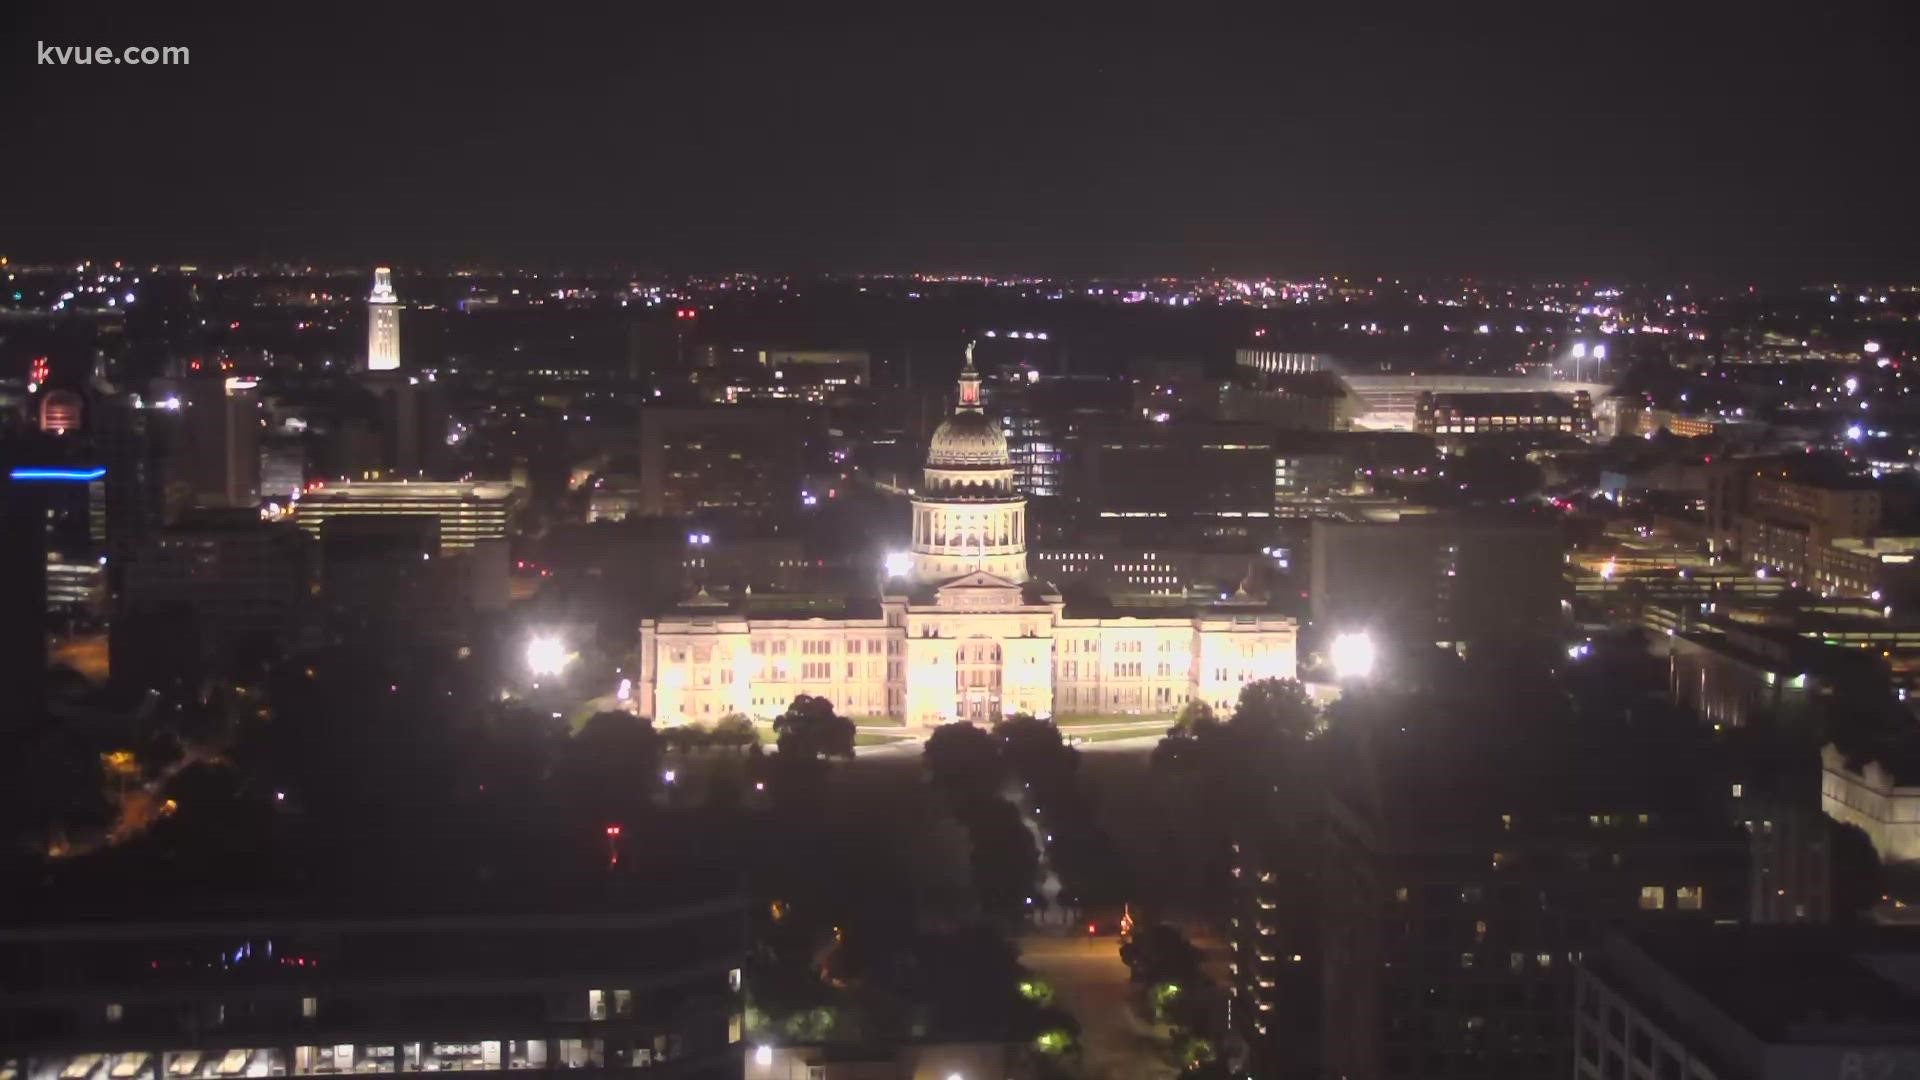 The Texas House advanced Senate Bill 1, a controversial GOP-backed election reform bill, after hours of debate.